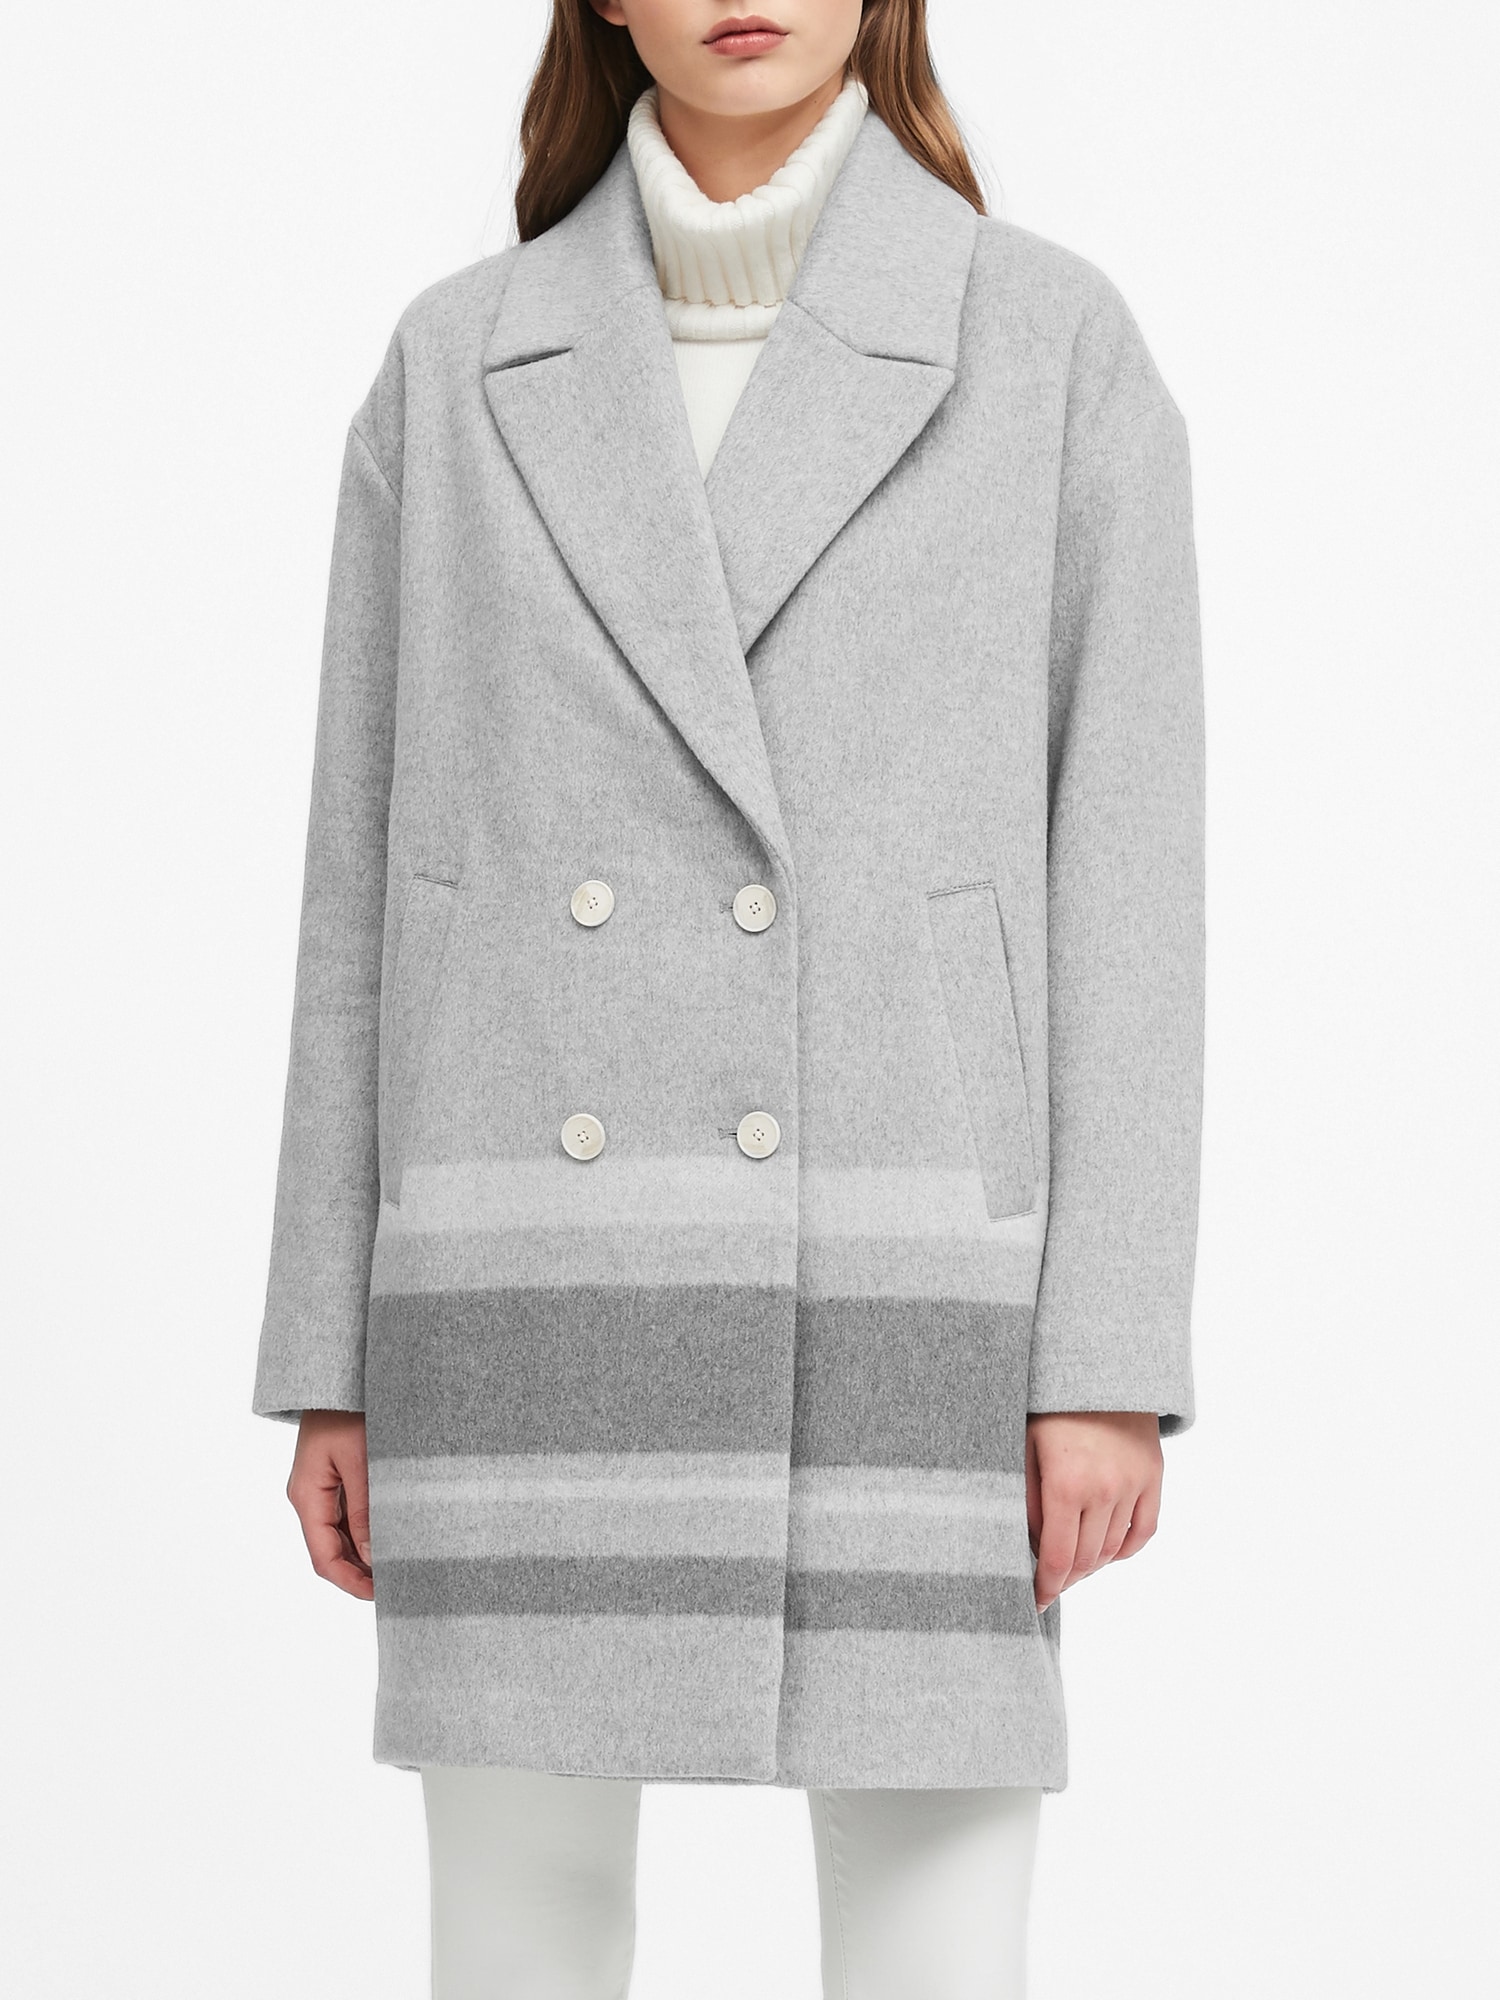 Oversized Double-Faced Cocoon Coat